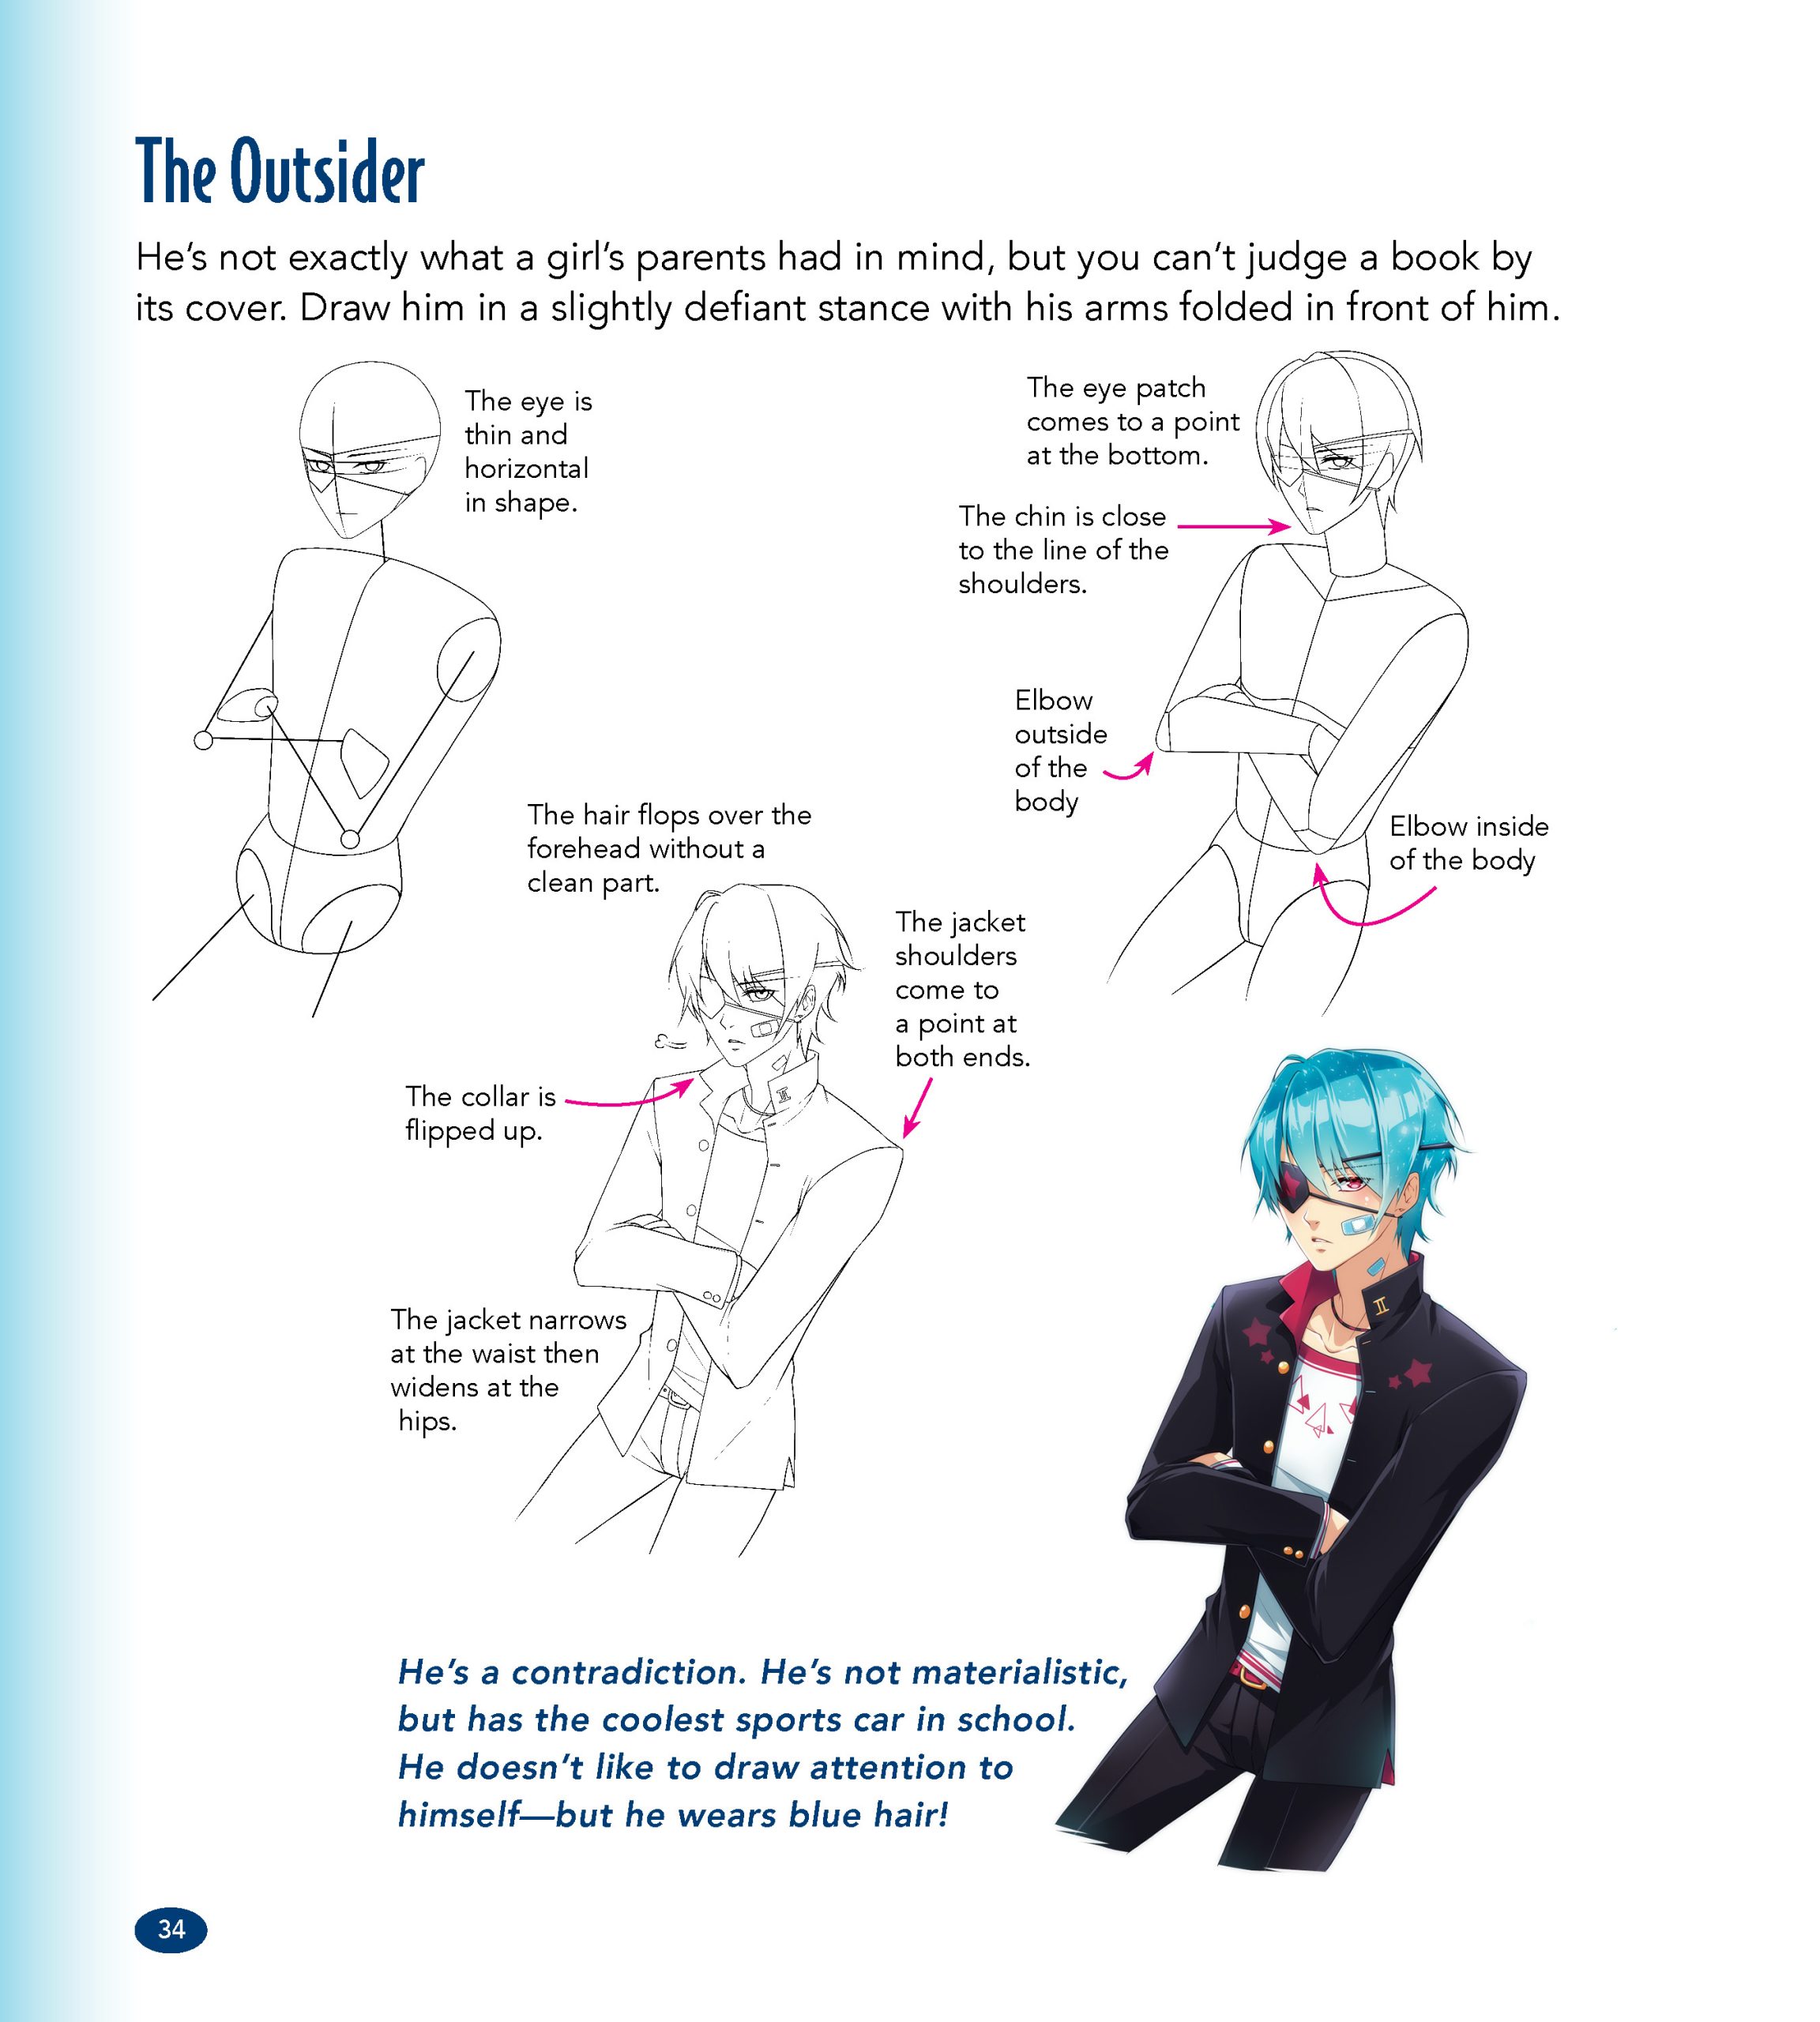  HOW TO DRAW ANIME PERFECT HAIR: The master guide to